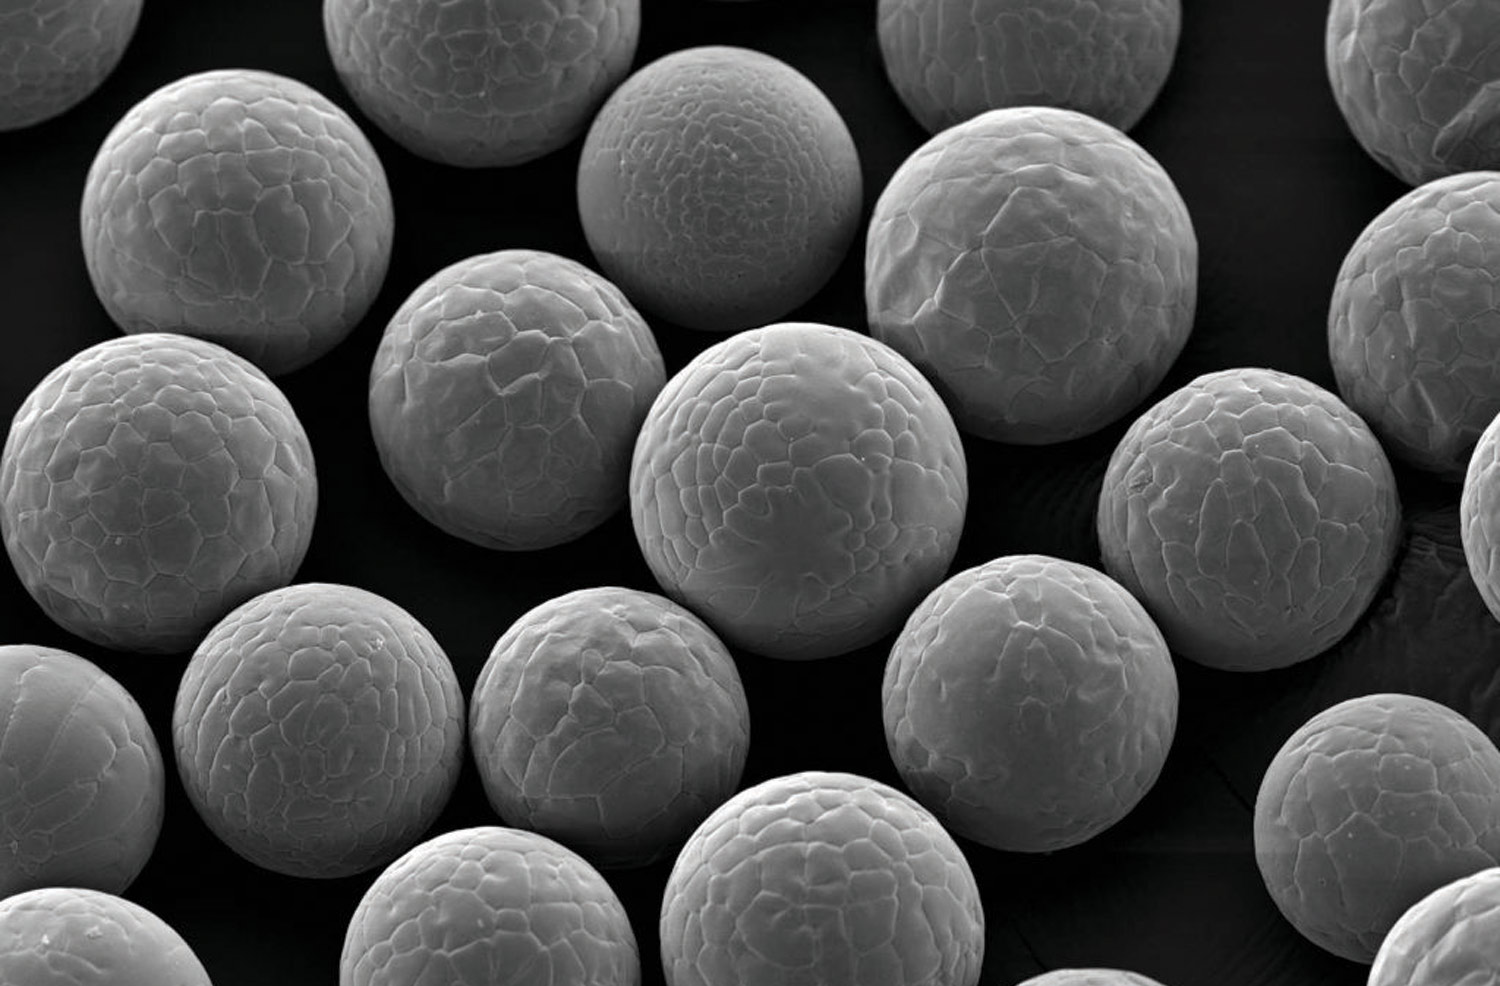 microscopic view of additive materials taking the form of small textured balls